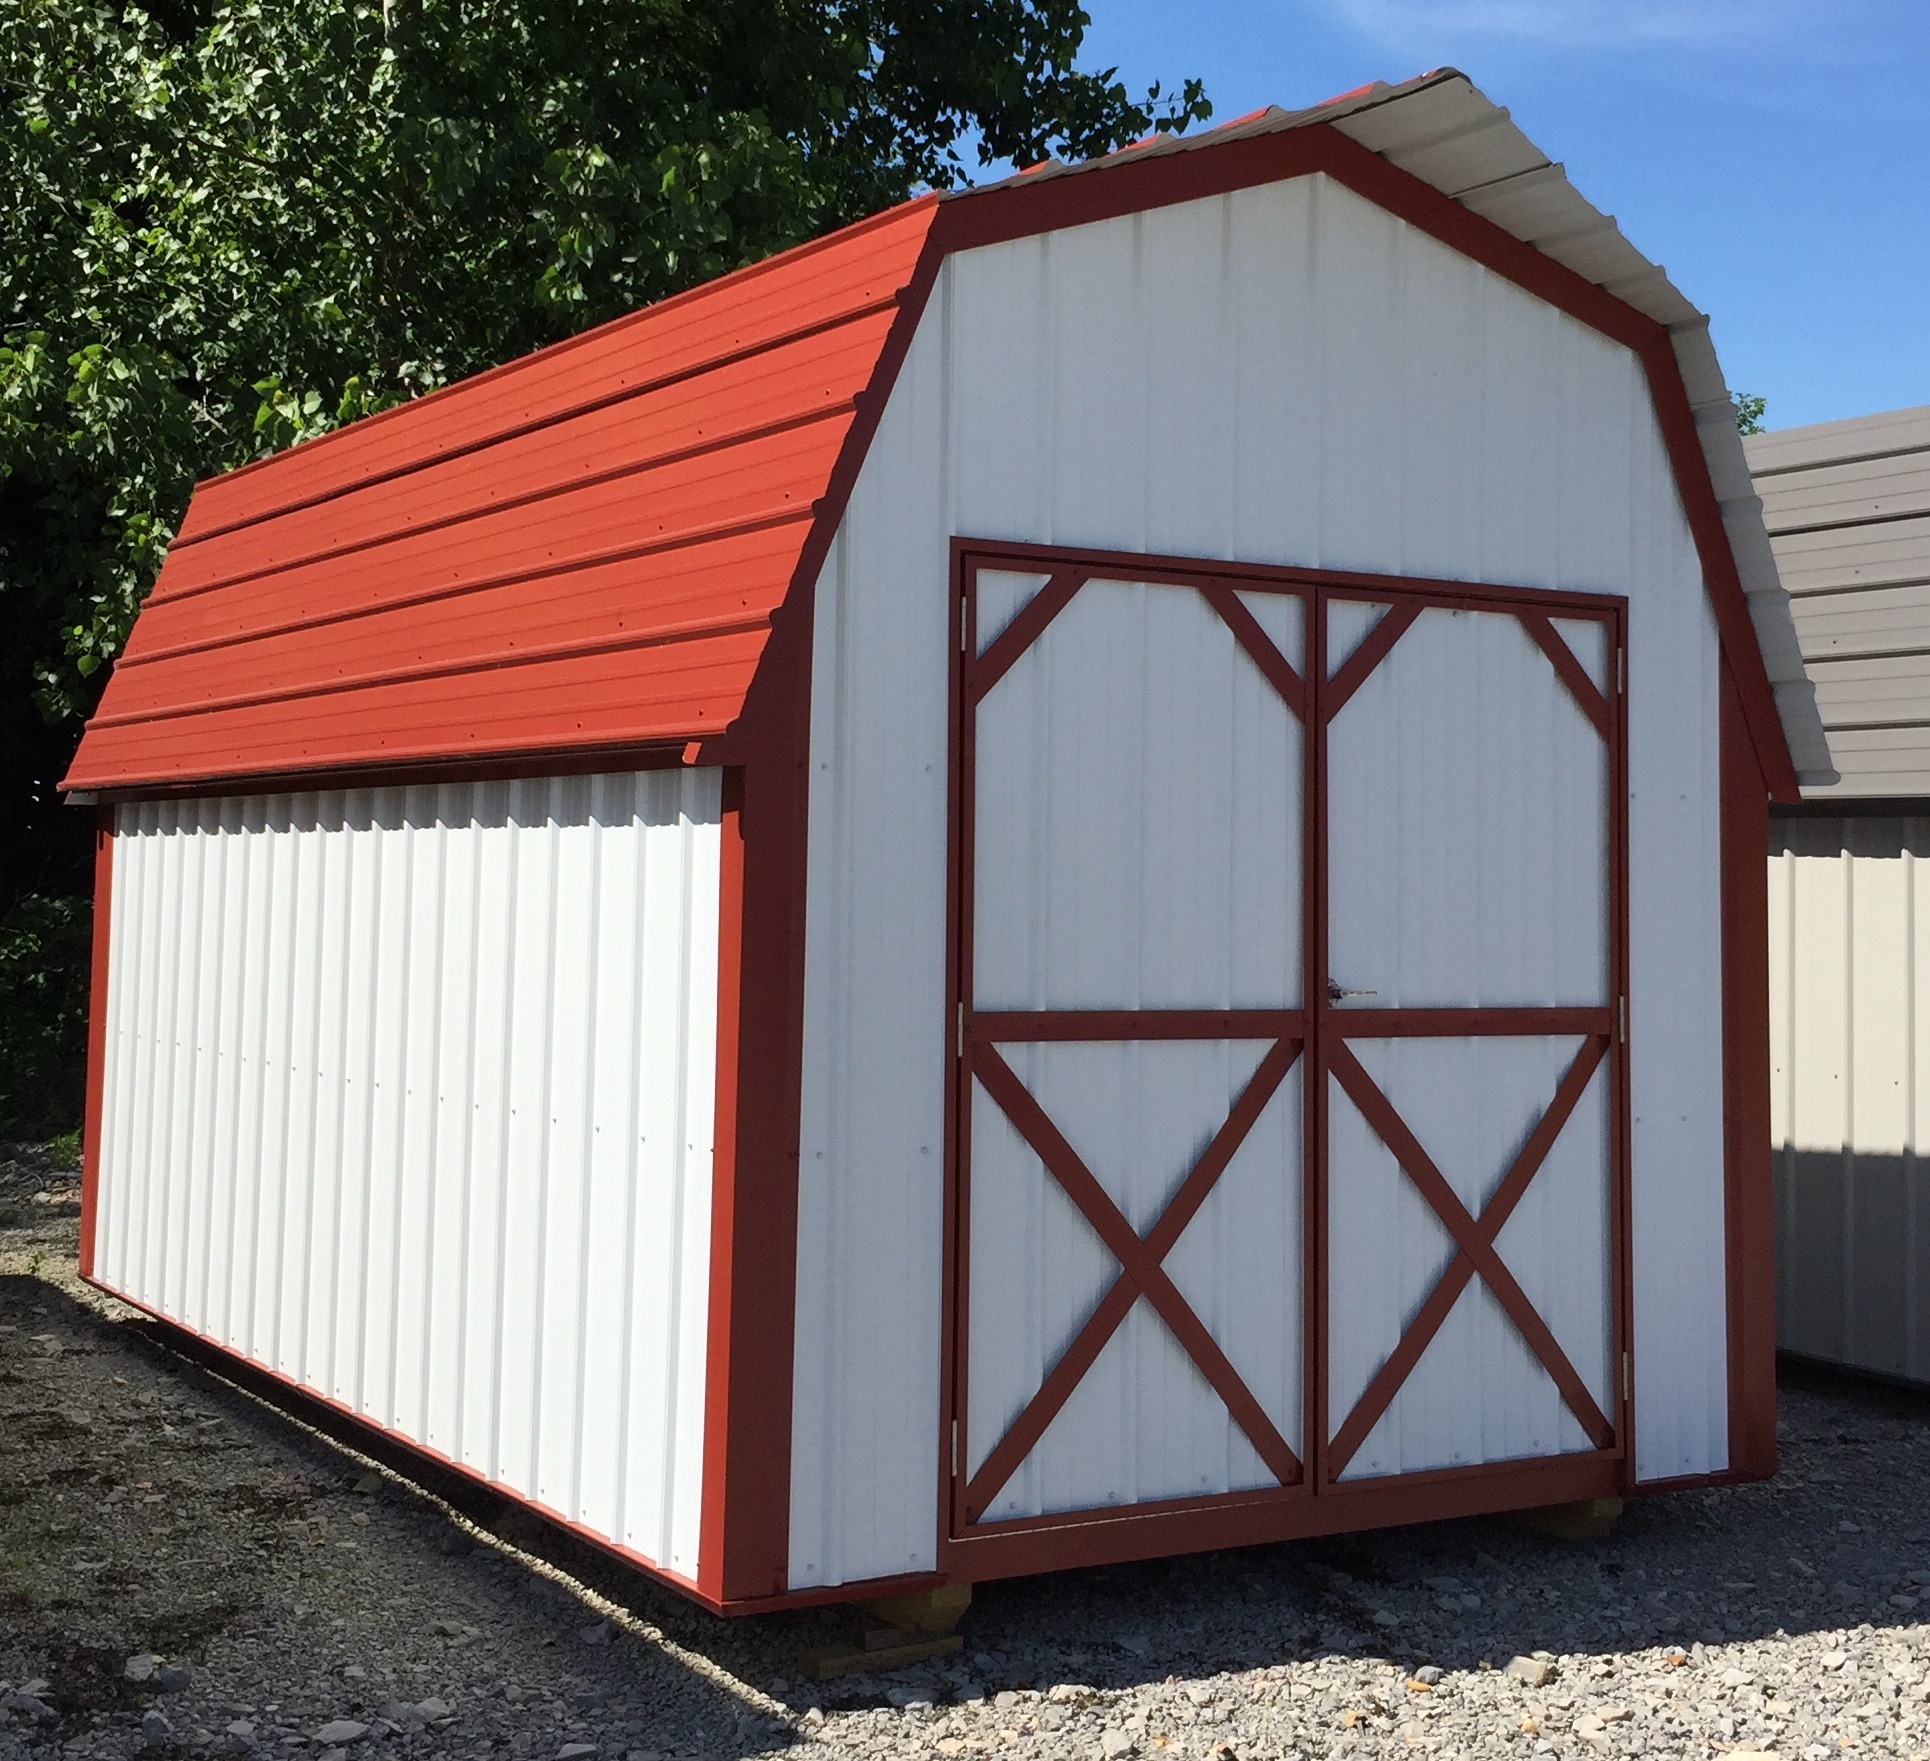 White metal lofted barn with red trim and roof